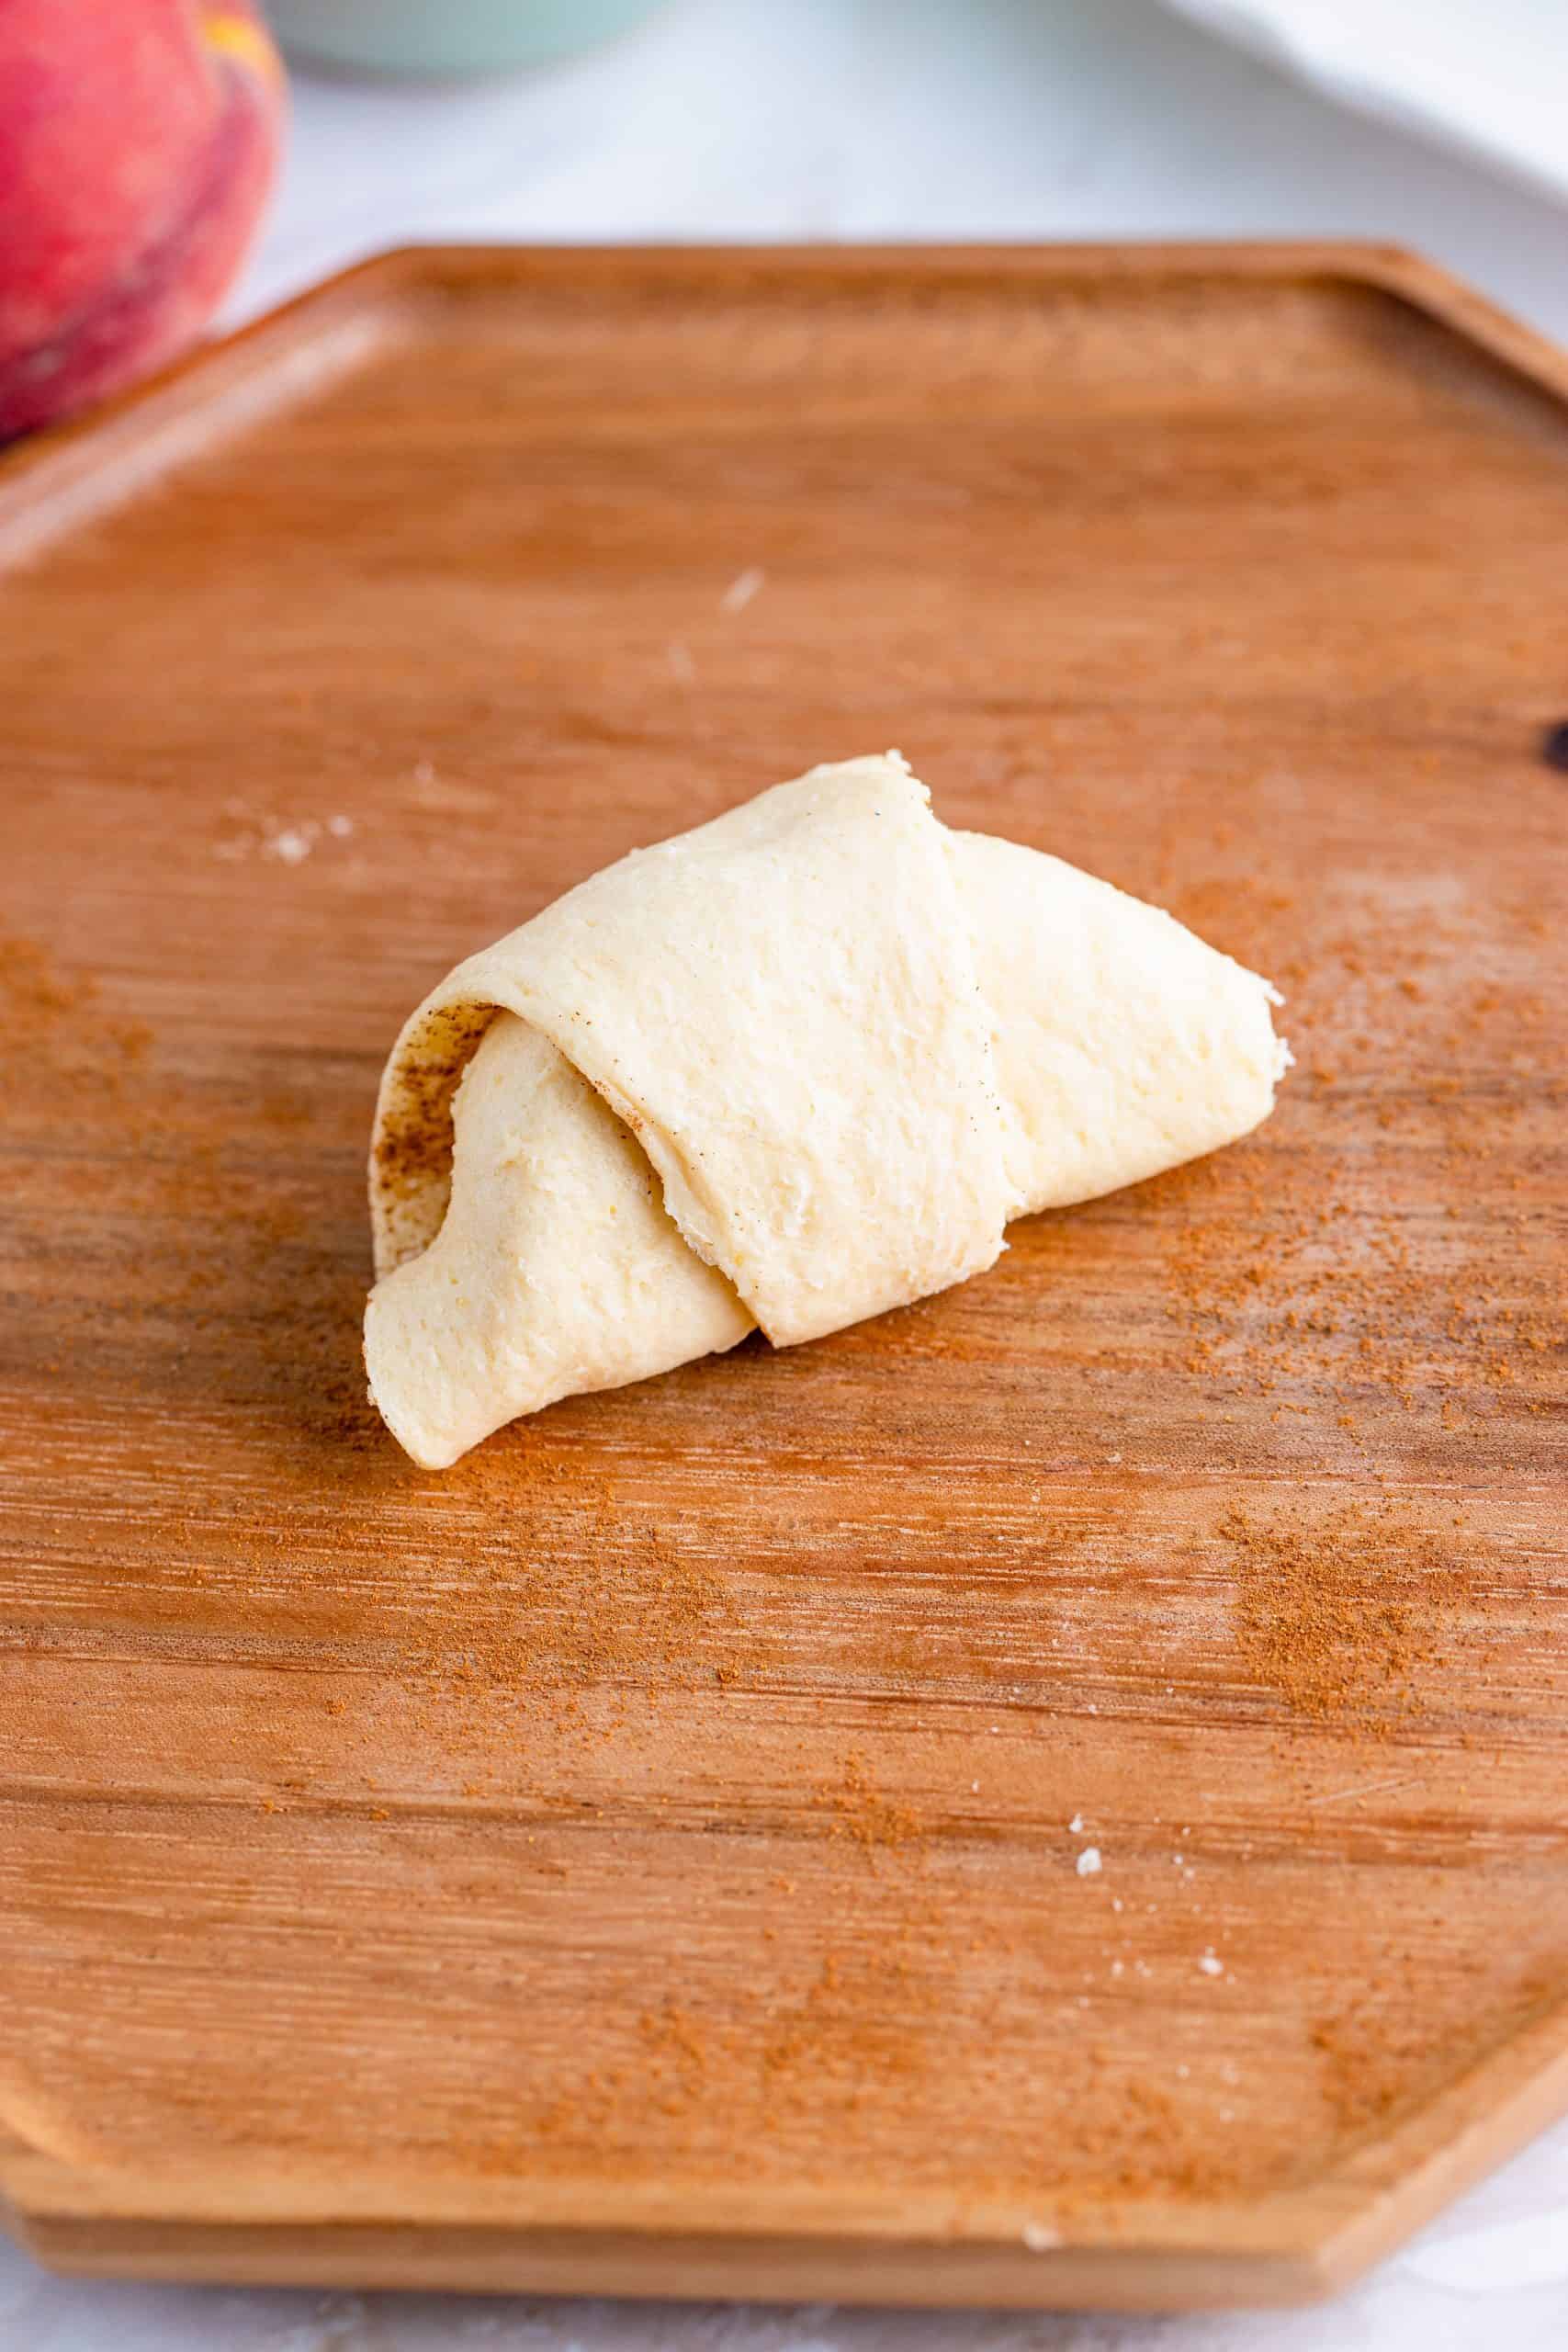 Peach rolled up in crescent roll making a dumpling.